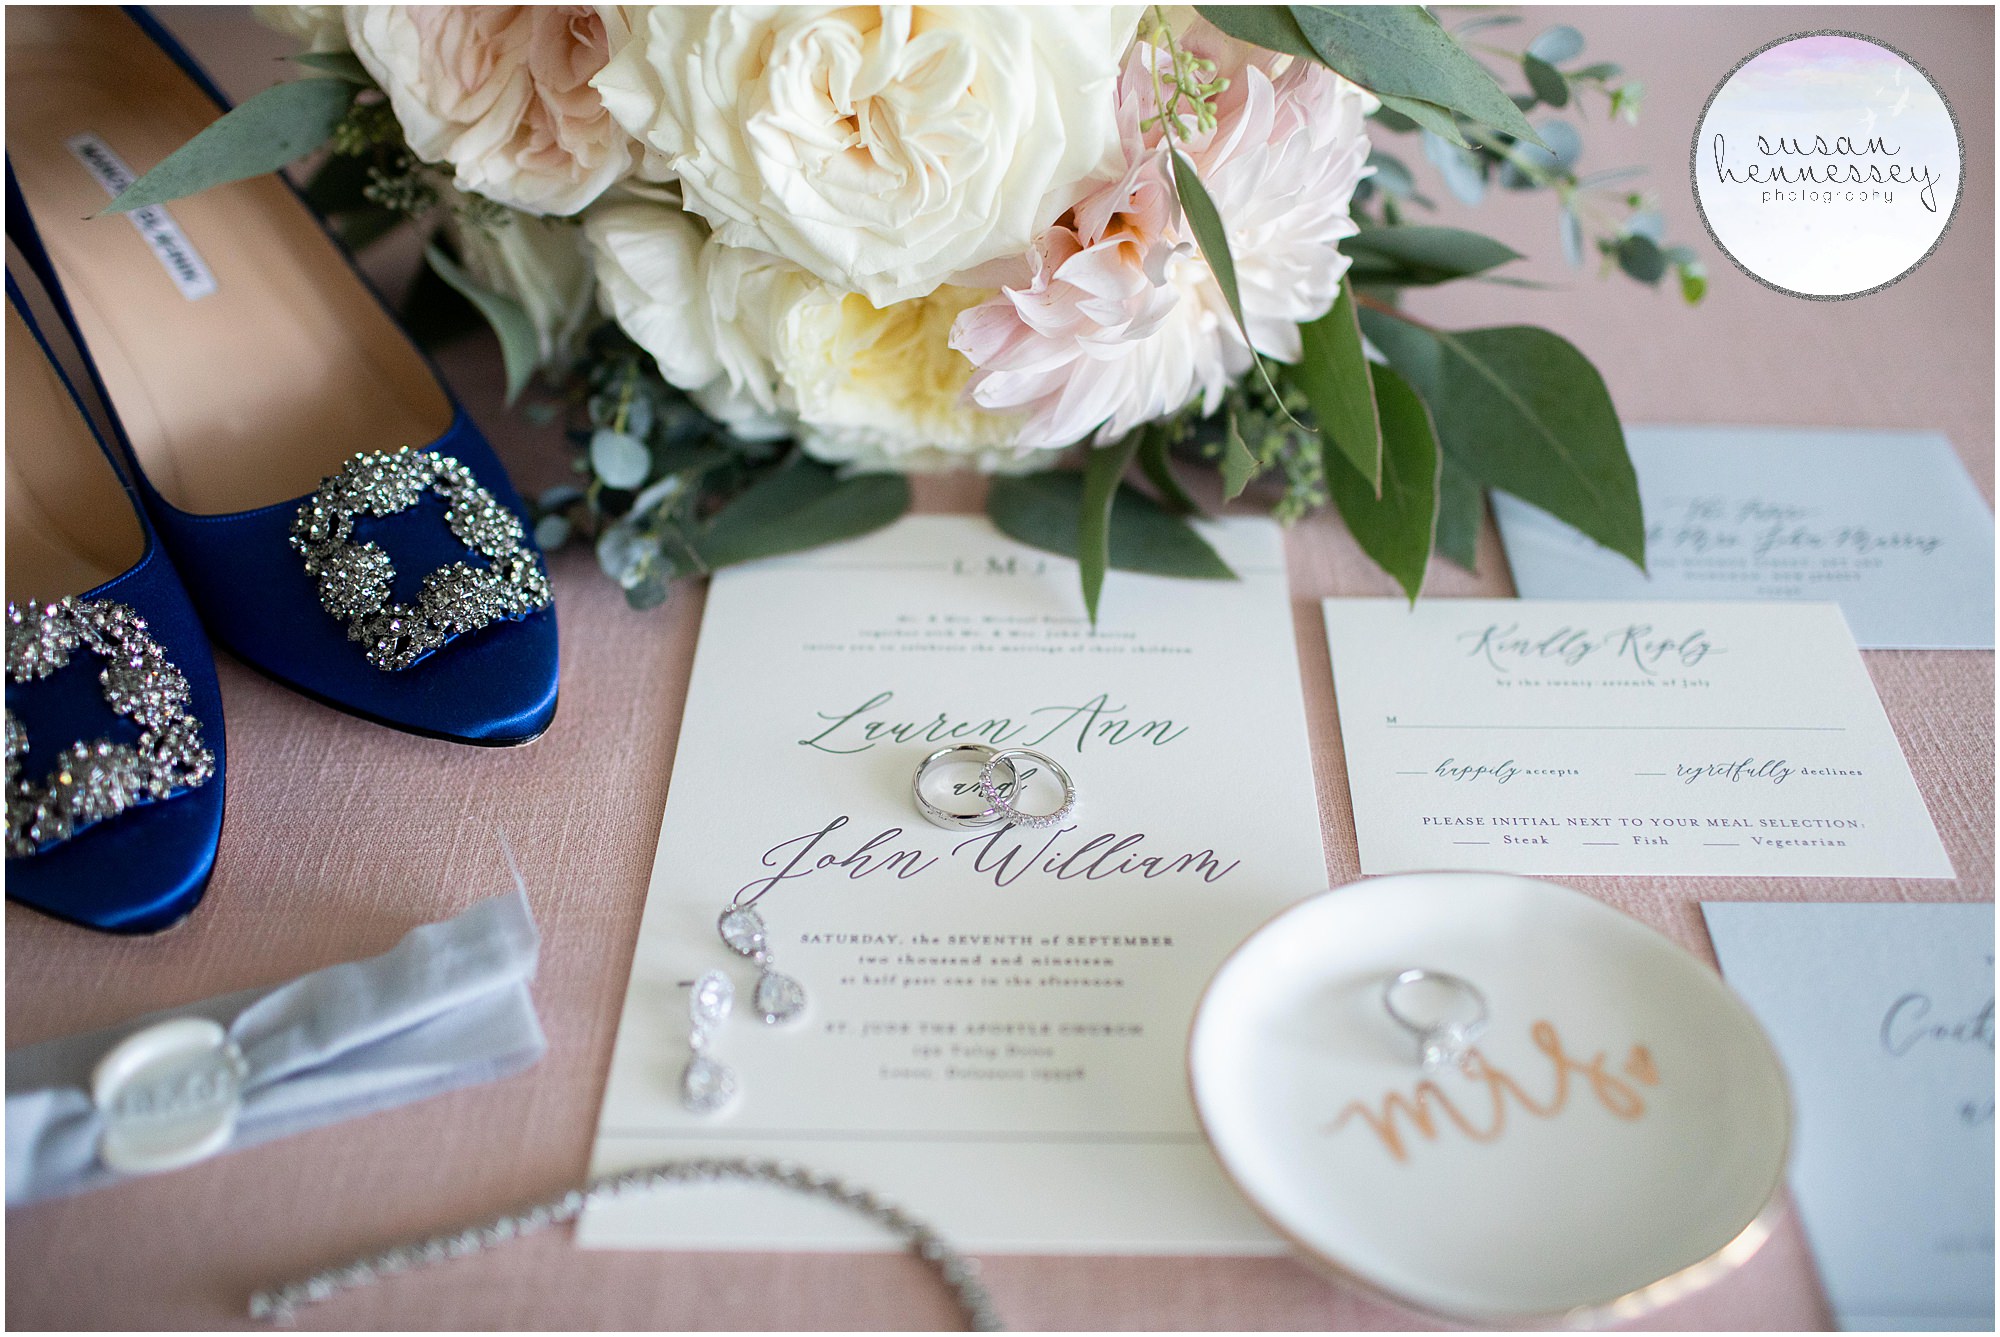 Bridal details featuring the bride's bouquet, invitation, wedding bands and blue manolo blahnik shoes.